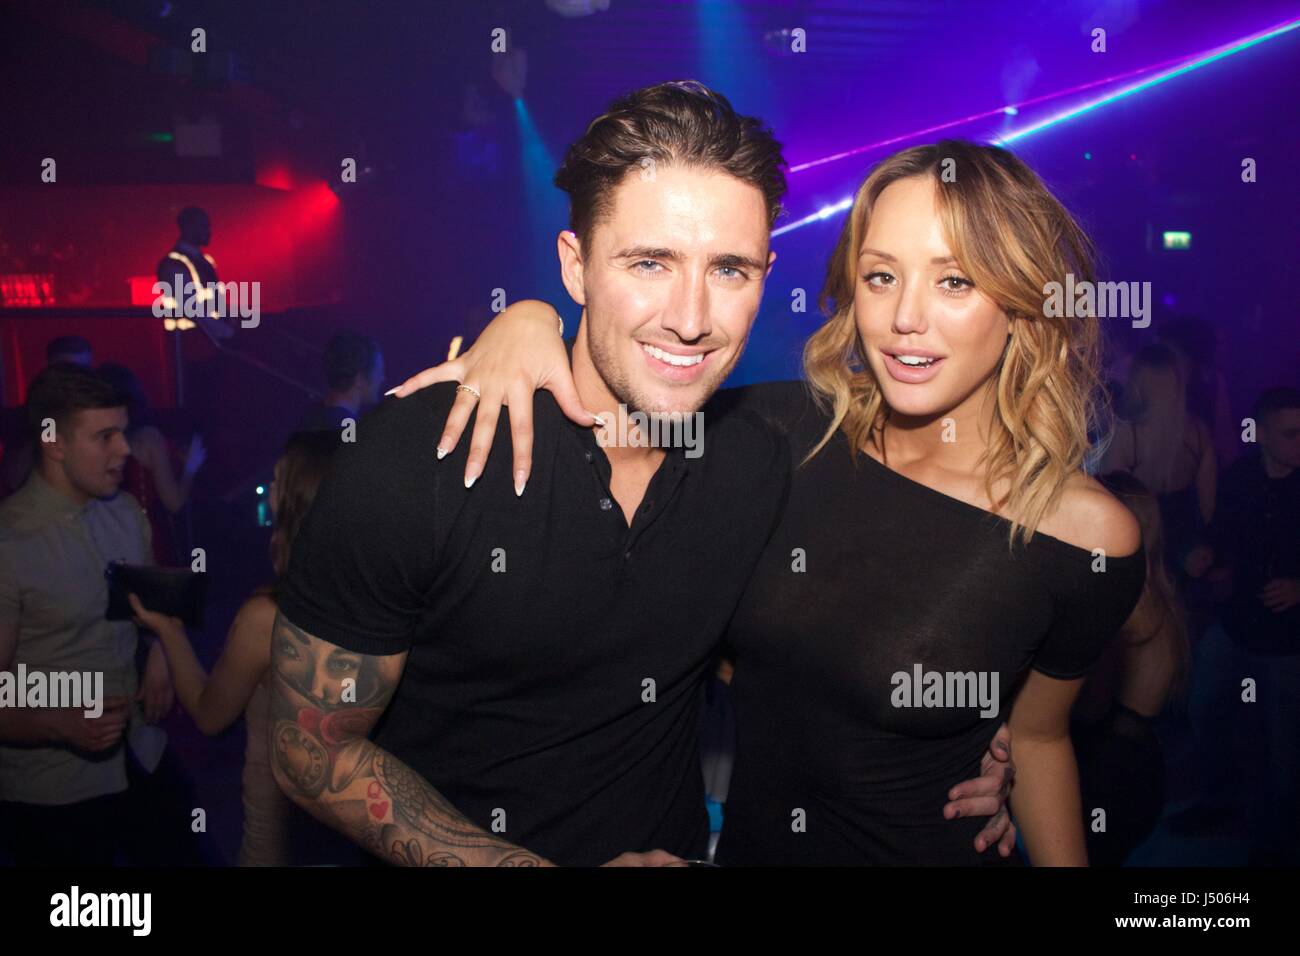 Watford, UK. 14th May, 2017. Exclusive Stephen bear makes parties with girlfriend Charlotte Crosby and friends in VIP area of Hydeout nightclub Watford, UK. The couple stayed until 3am downing shots and drinks and dancing. Charlotte suffered a wardrobe malfunction exposing her nipples and danced barefoot. Stephen posed for photos with fans but charlotte declined requests but still joined them on dancefloor. The couple were seen passionately kissing throughout the night. They visited the dj booth separately with charlotte joking about Stephen’s penis over the mic to revellers on her visit. Cred Stock Photo